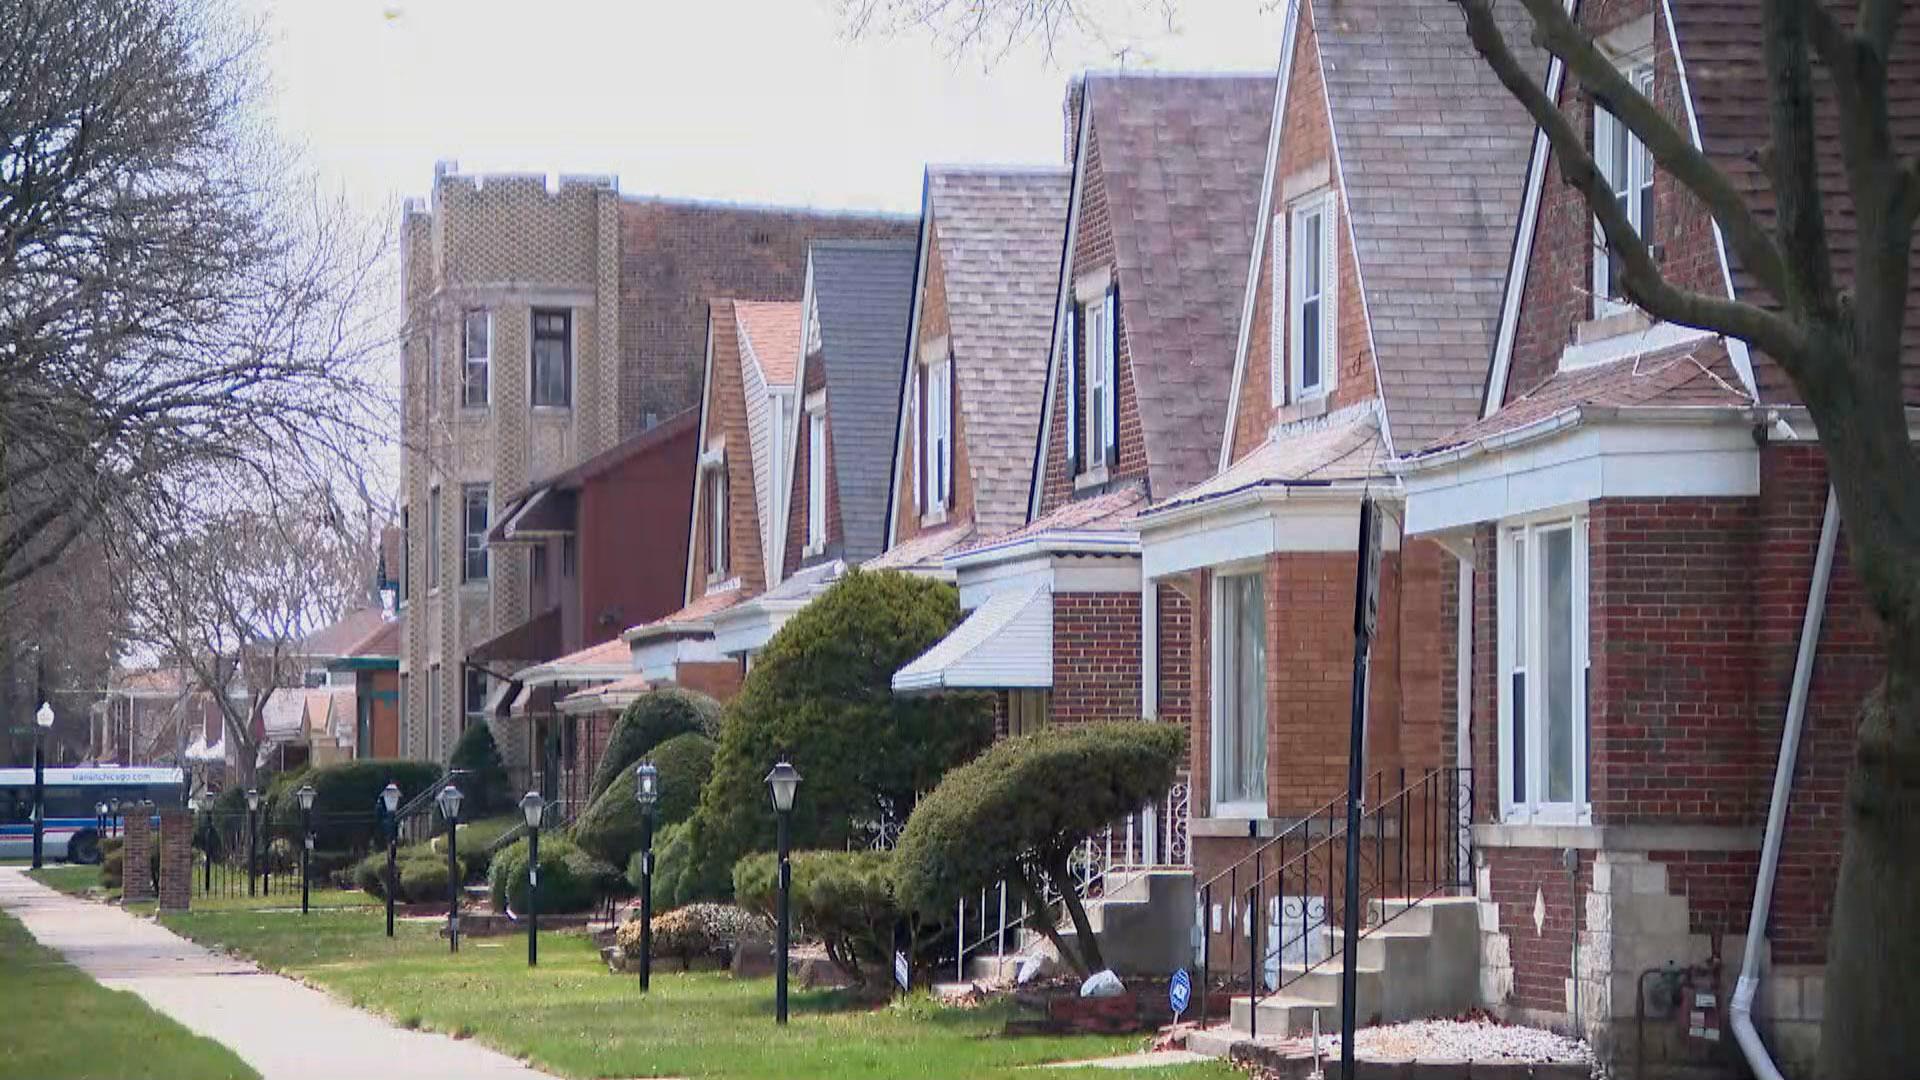 A row of homes in Chicago’s Chatham neighborhood on Monday, April 6, 2020. (WTTW News)